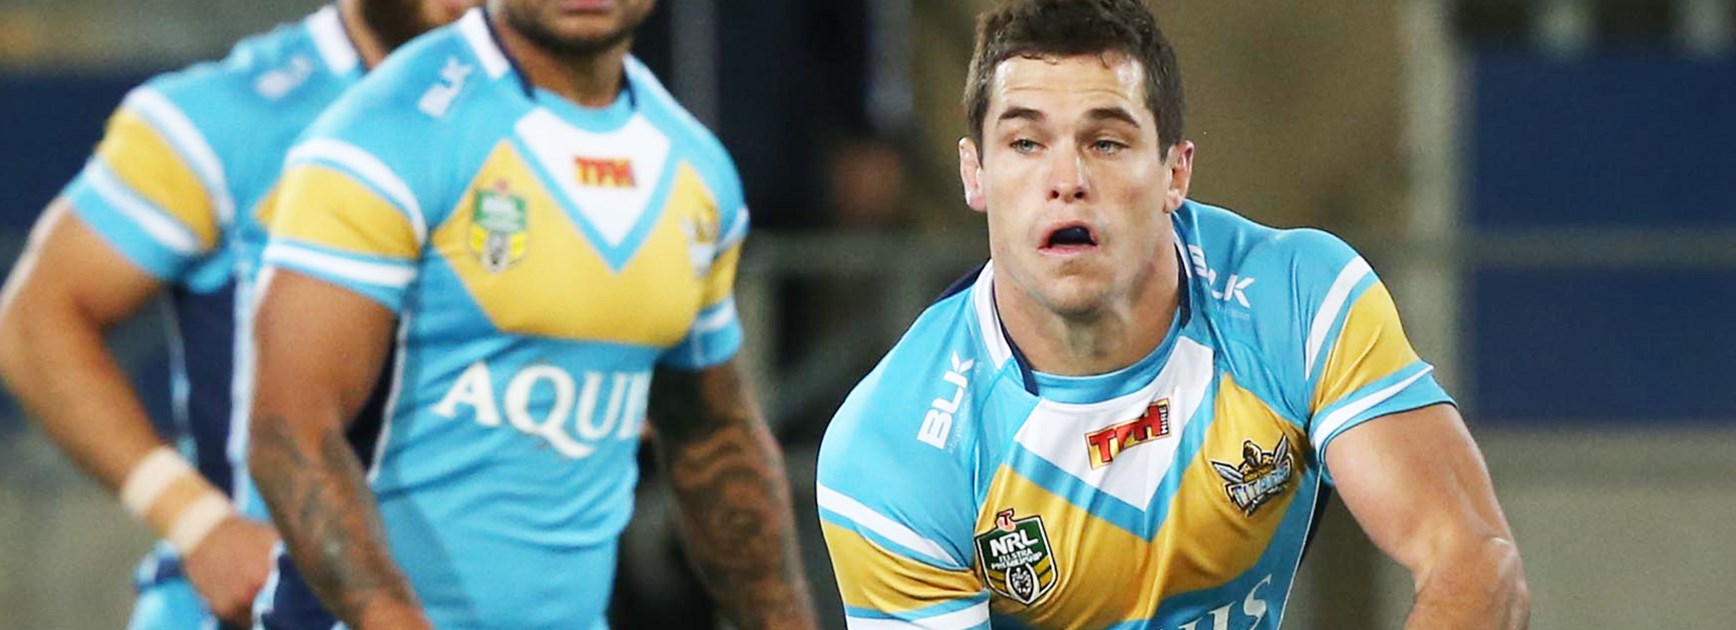 Daniel Mortimer has been named at halfback for the Titans against his former club the Roosters on Sunday.